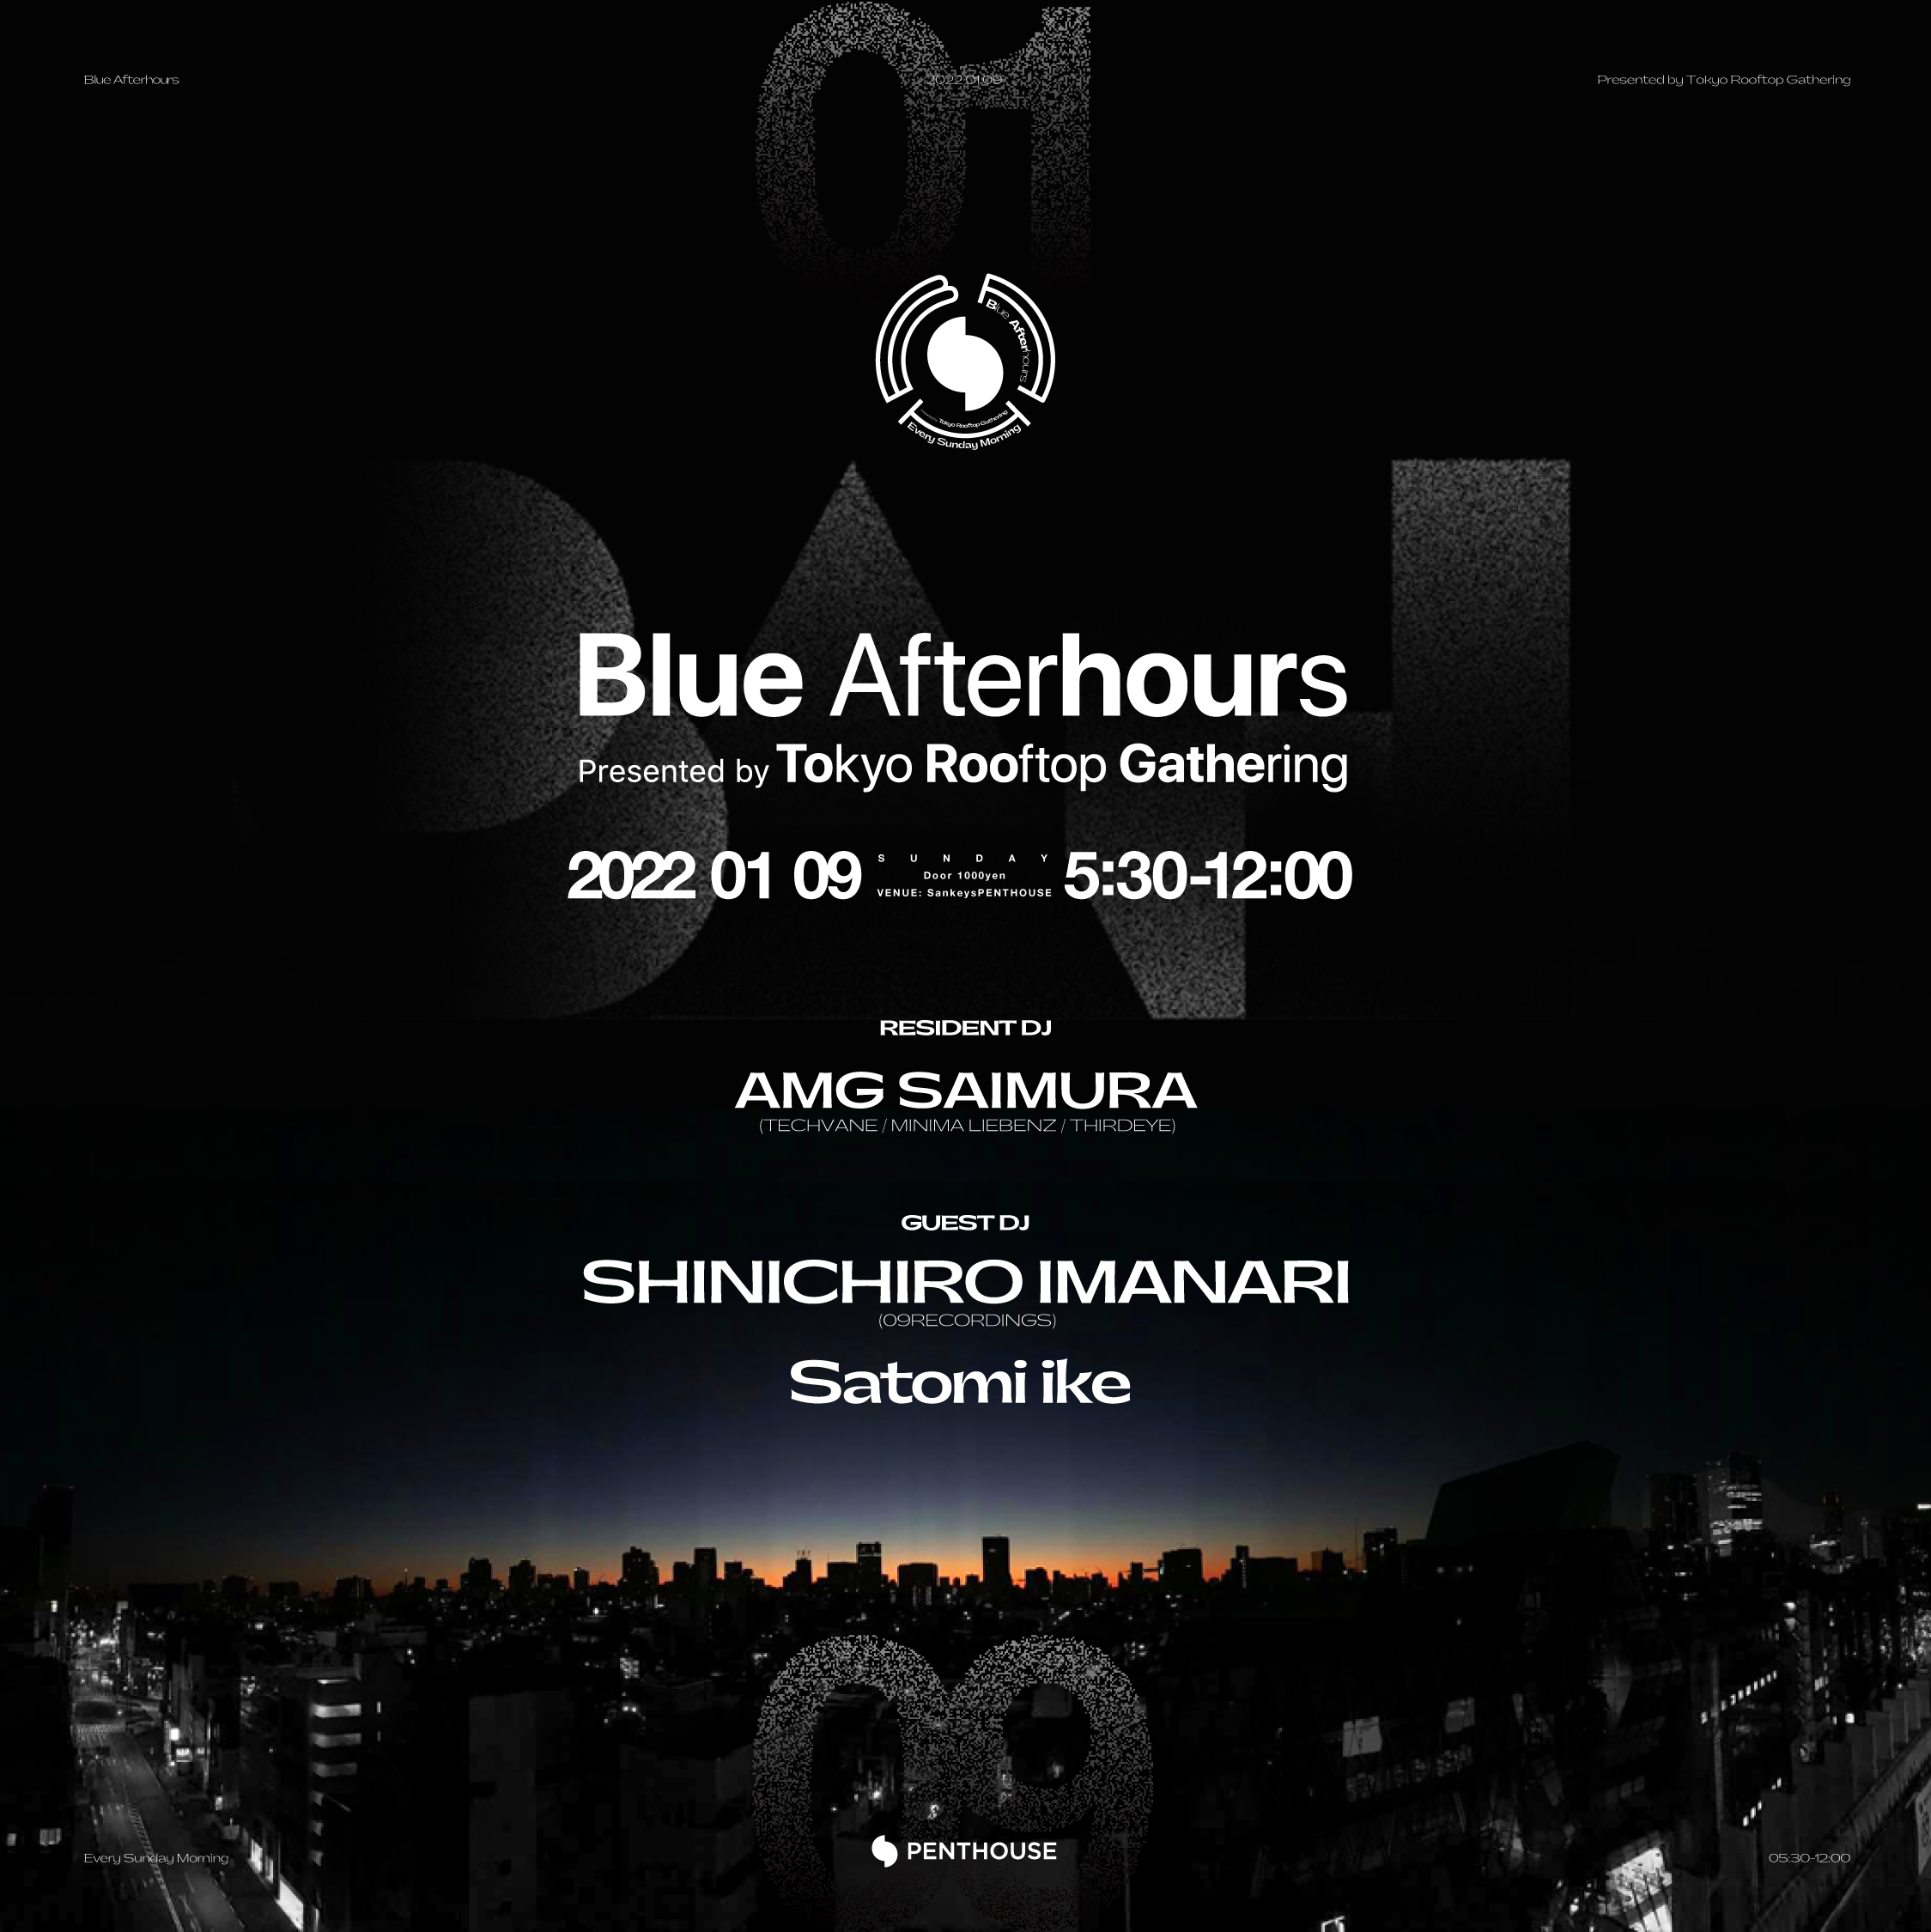 Blue Afterhours – Presented by Tokyo Rooftop Gathering-